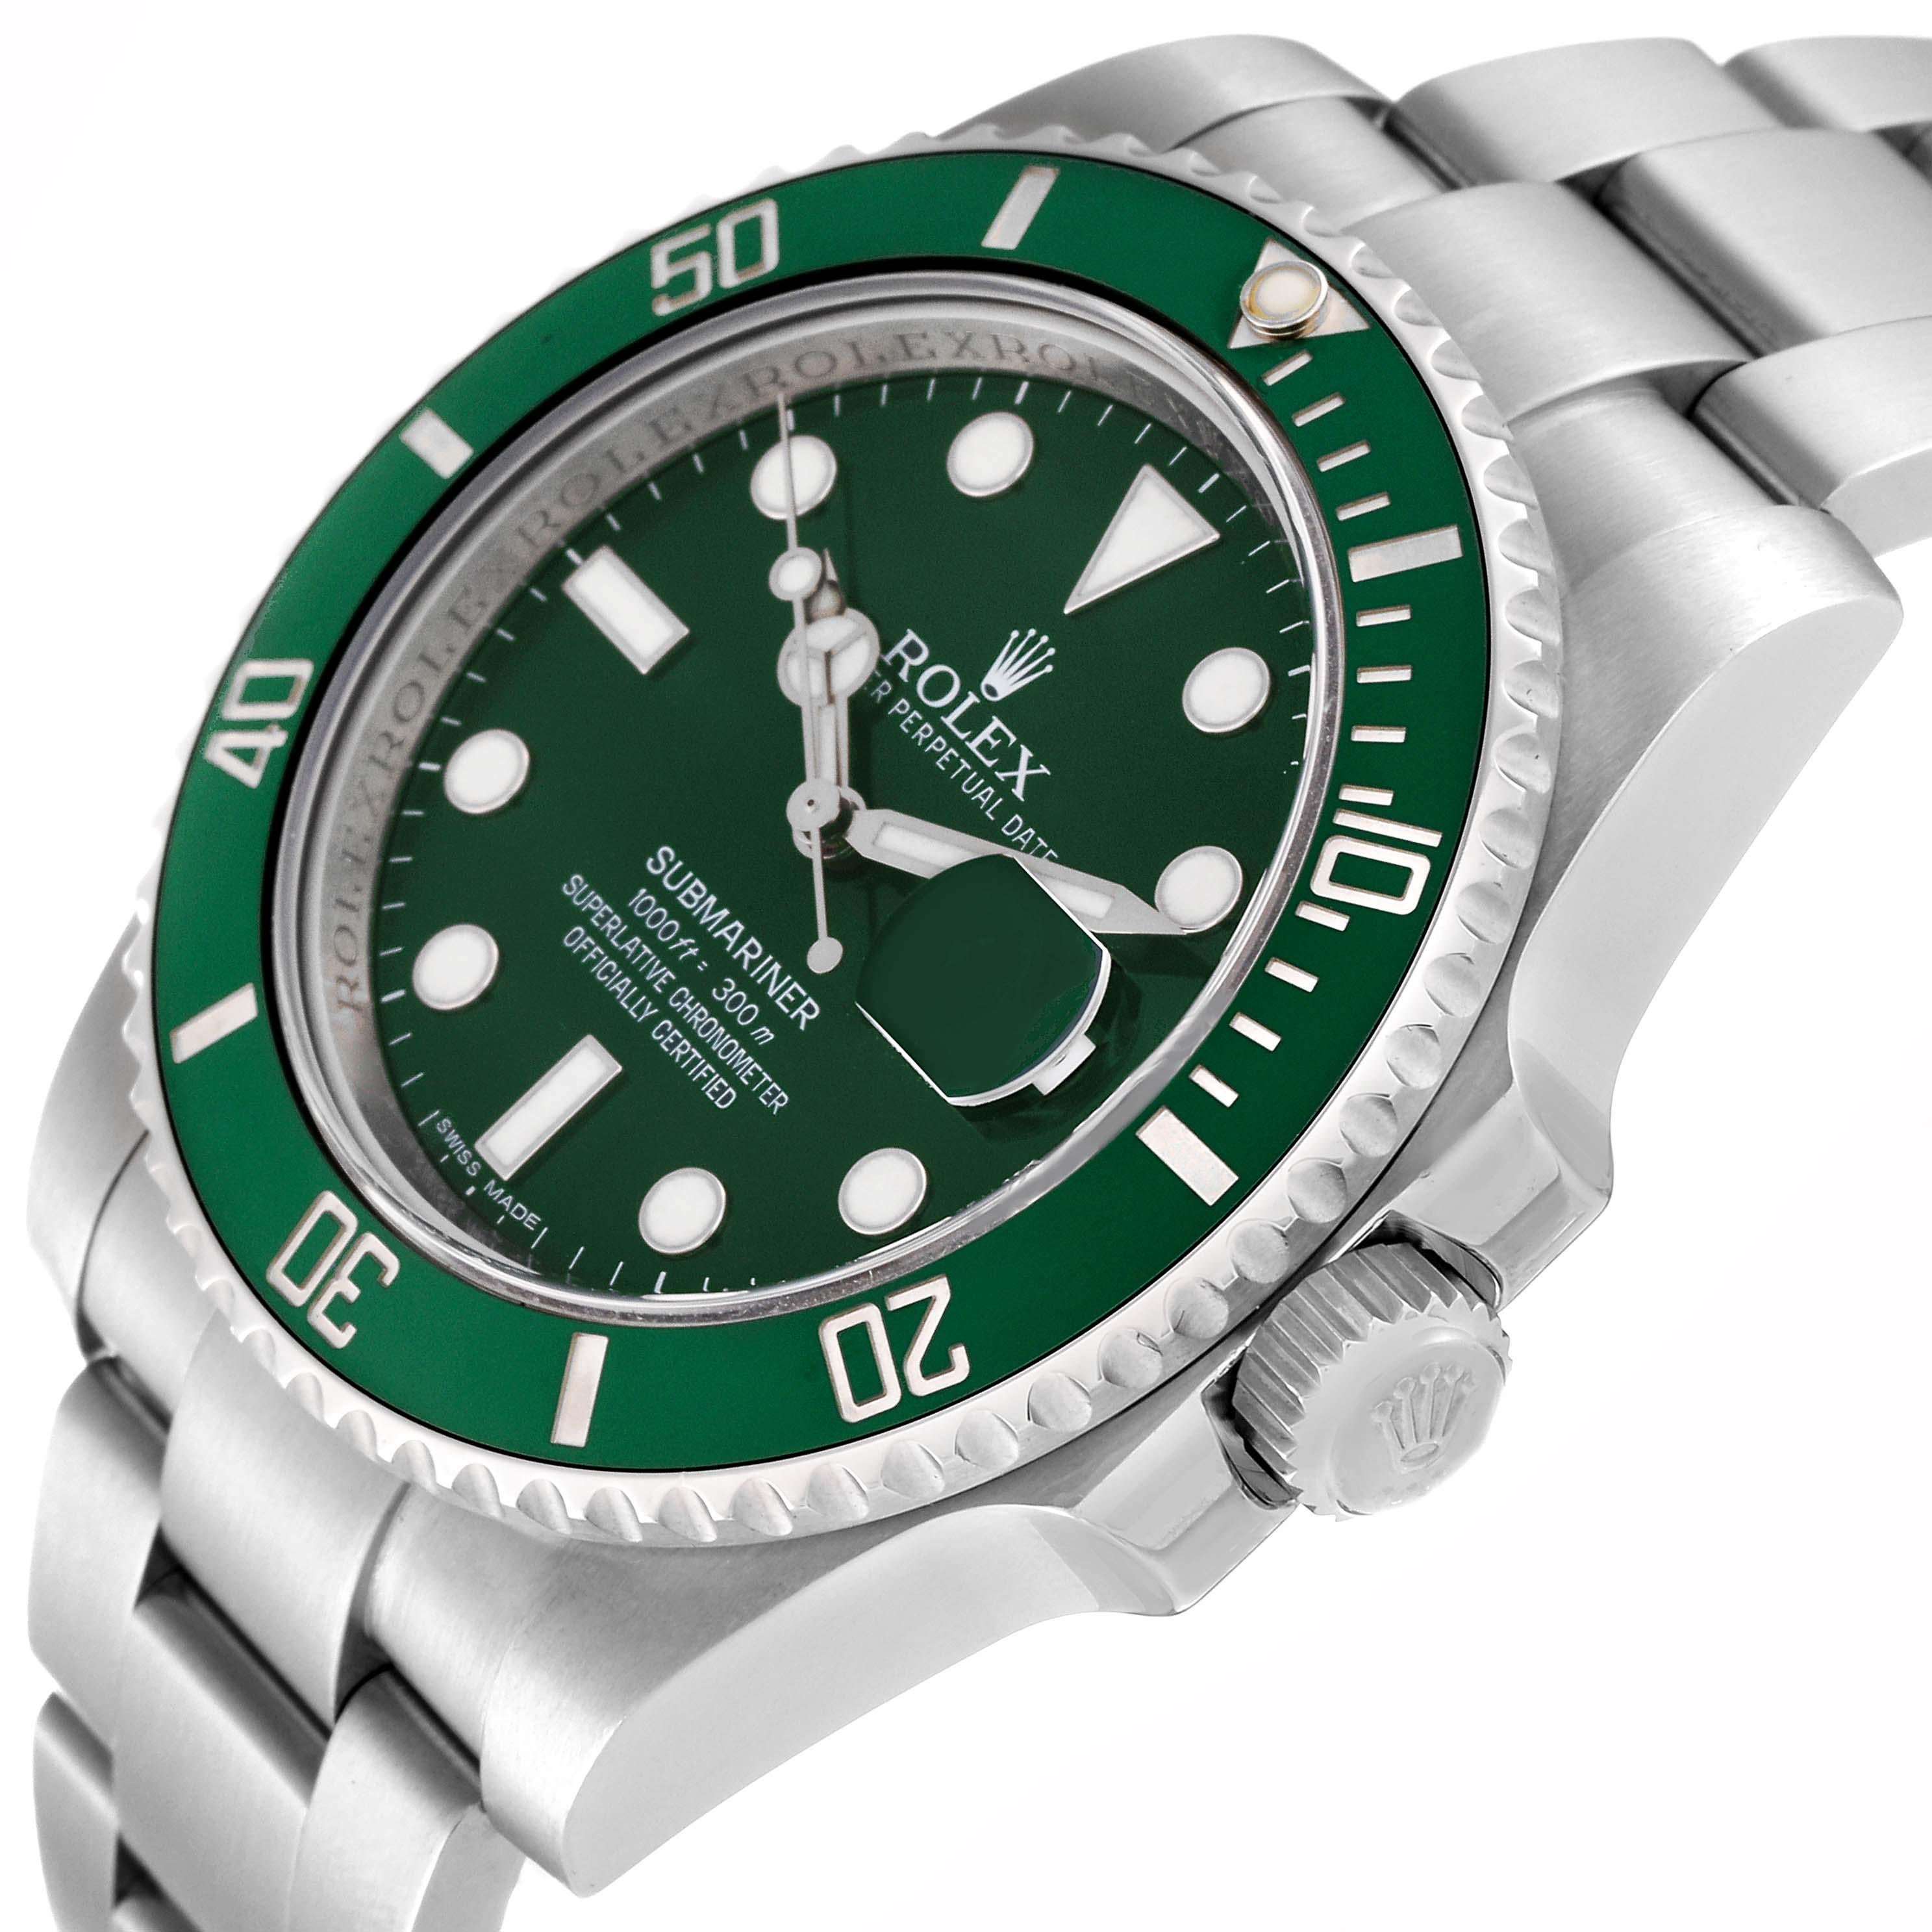 Rolex Submariner Hulk Green Dial Steel Mens Watch 116610LV Box Card For Sale 4